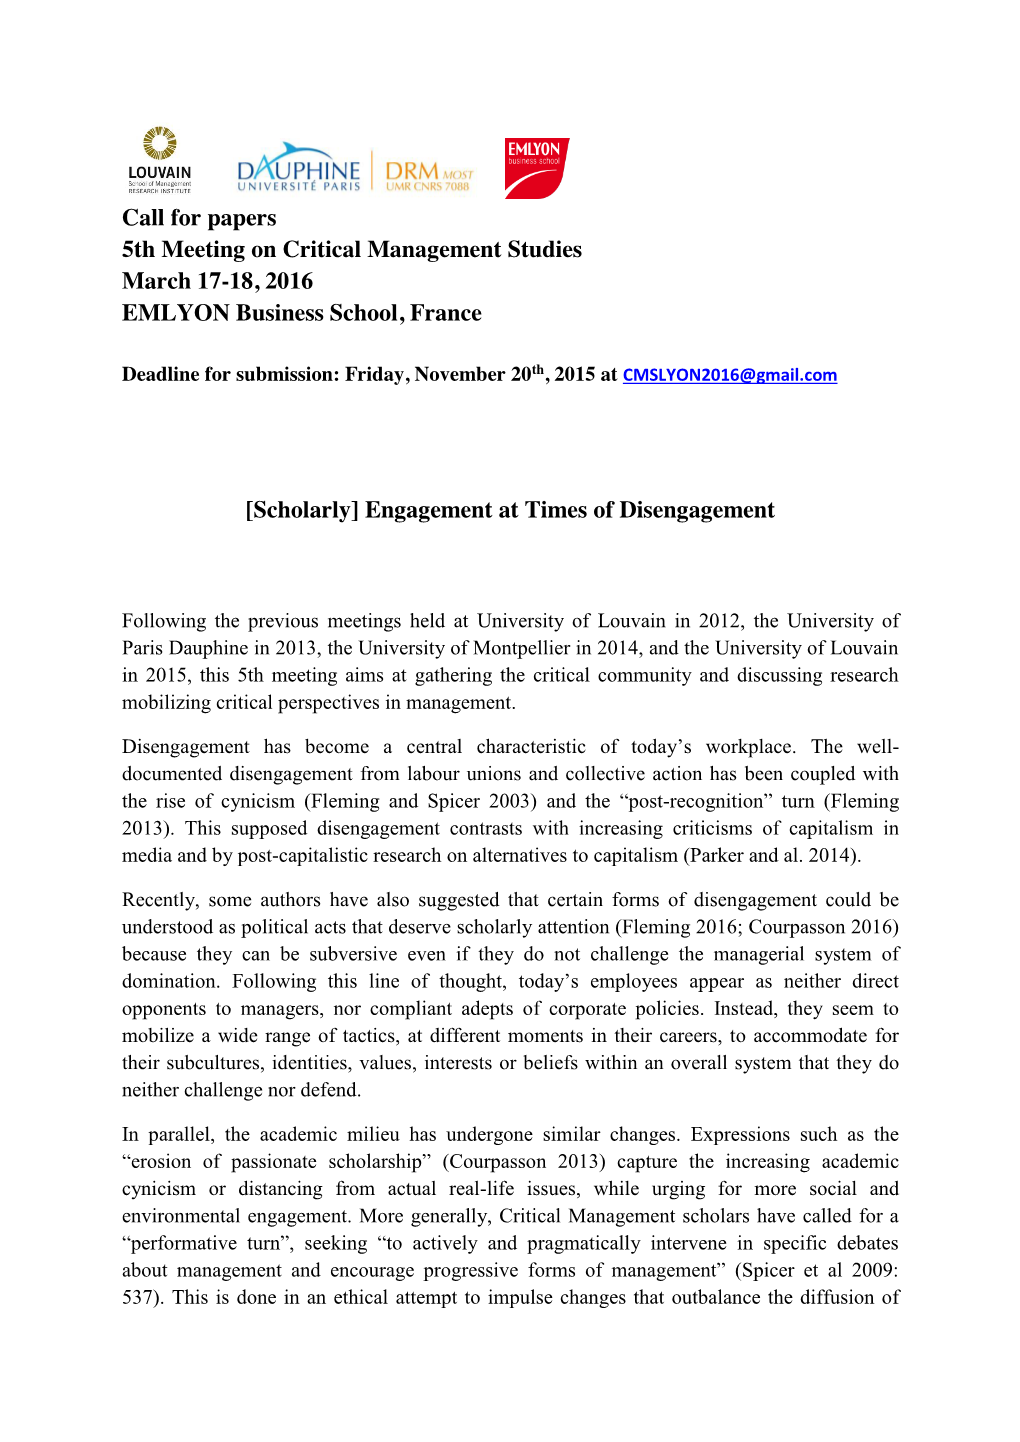 Call for Papers 5Th Meeting on Critical Management Studies March 17-18, 2016 EMLYON Business School, France